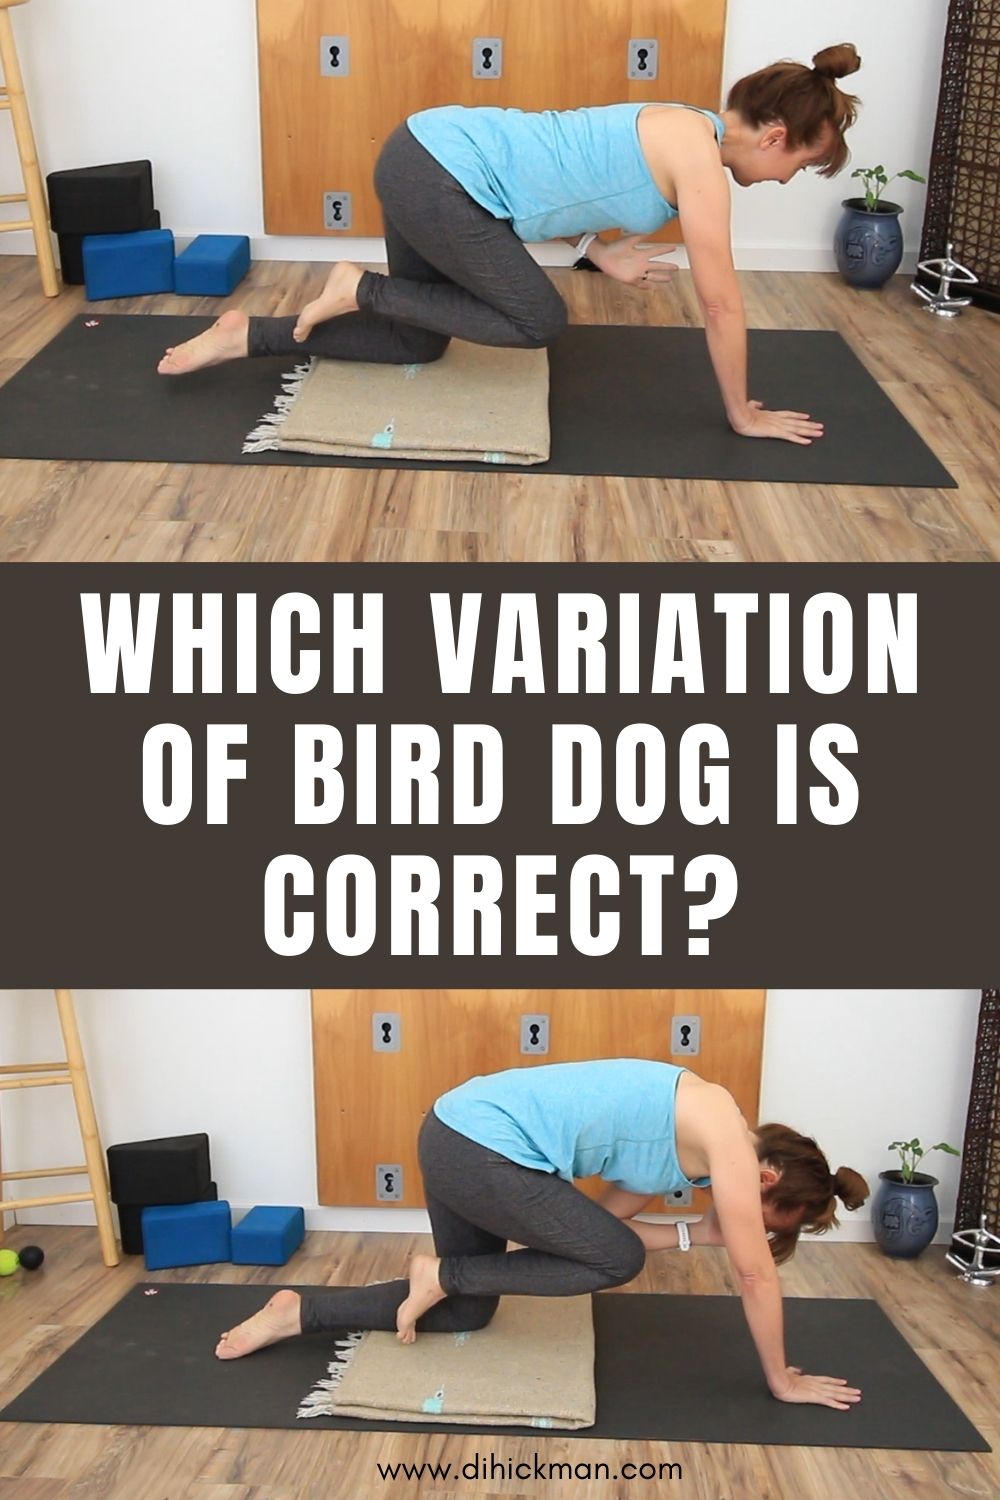 which variation of bird dog is correct?